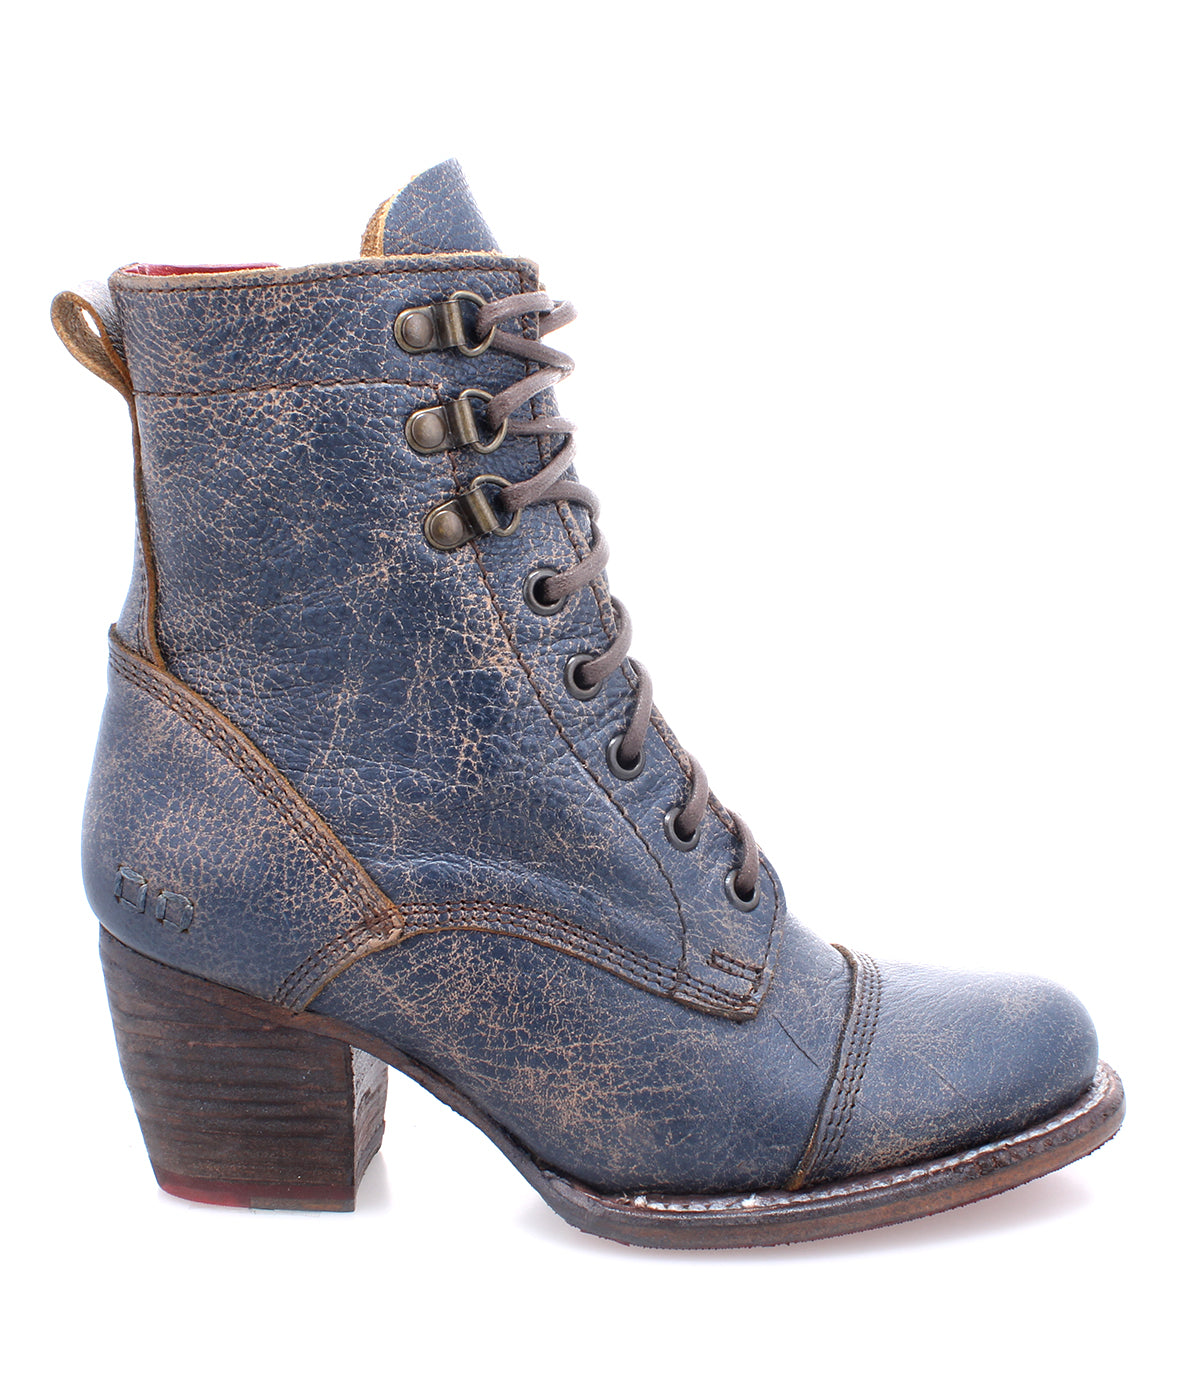 A women's blue ankle boot with a wooden heel, called Judgement by Bed Stu.